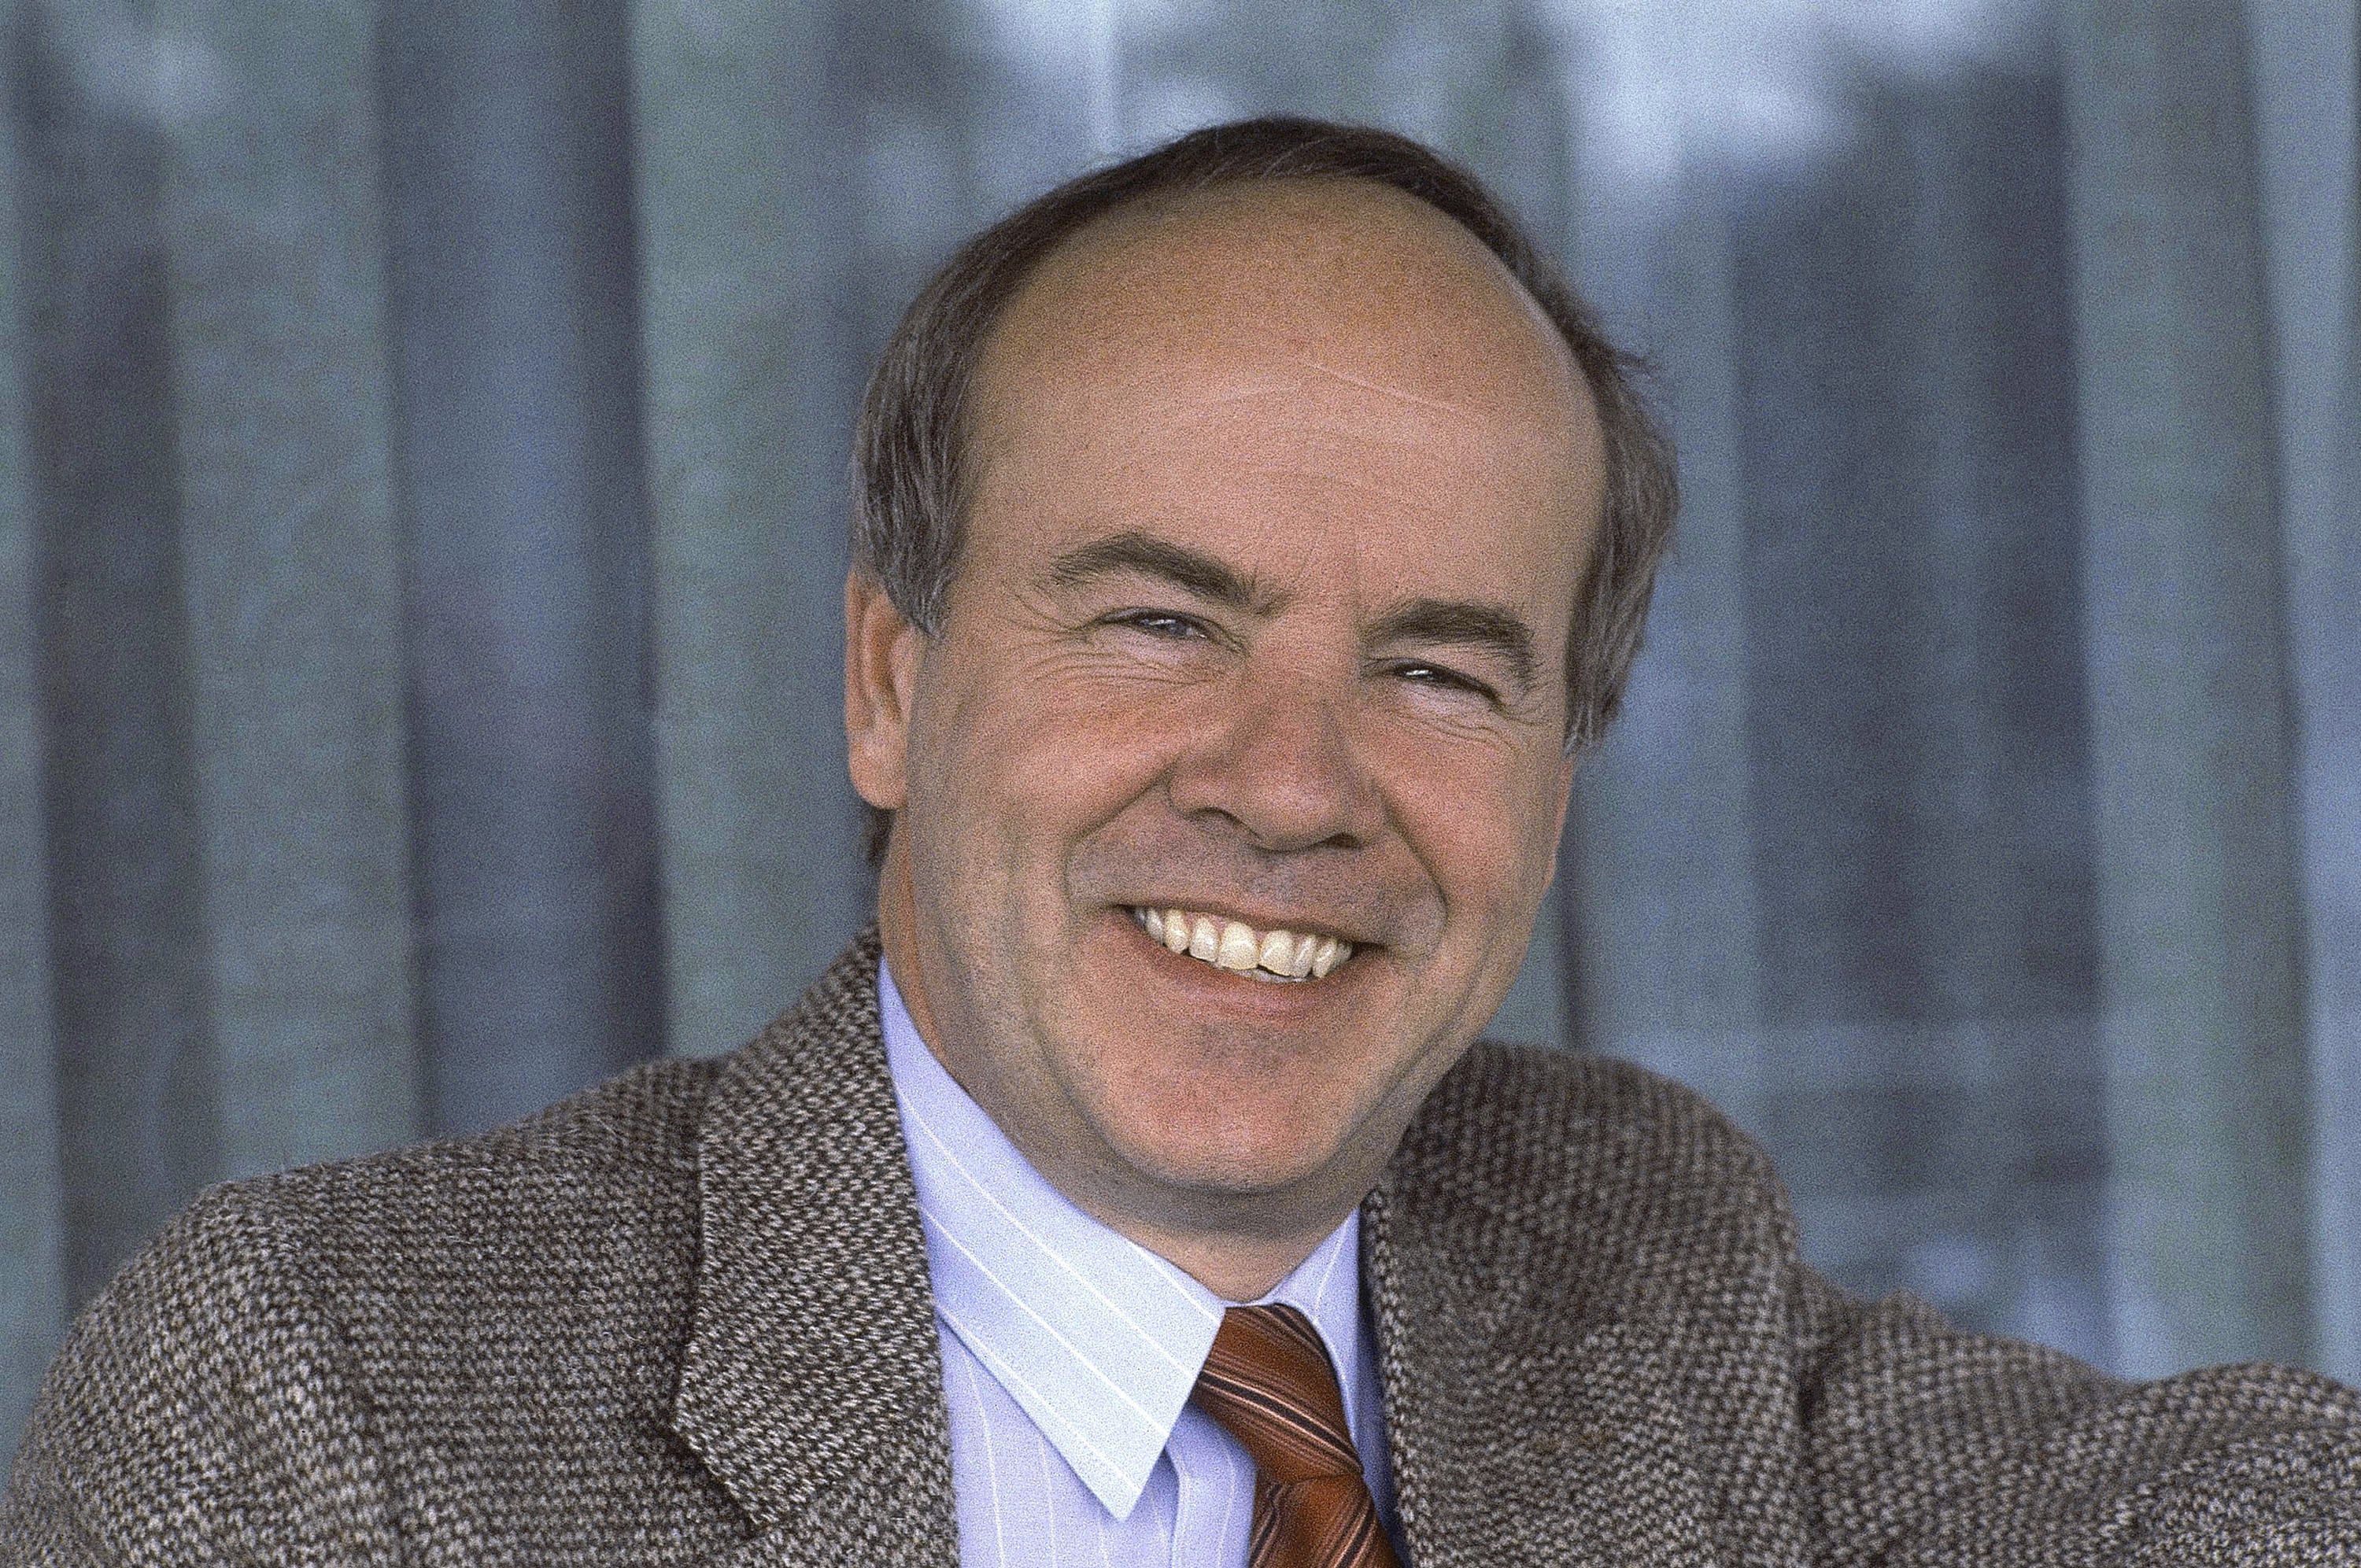 FILE - A Feb. 15, 1983 file photo shows comedian Tim Conway. Conway, the stellar second banana to Carol Burnett who won four Emmy Awards on her TV variety show, died Tuesday, May 14, 2019, after a long illness in Los Angeles, according to his publicist. He was 85.